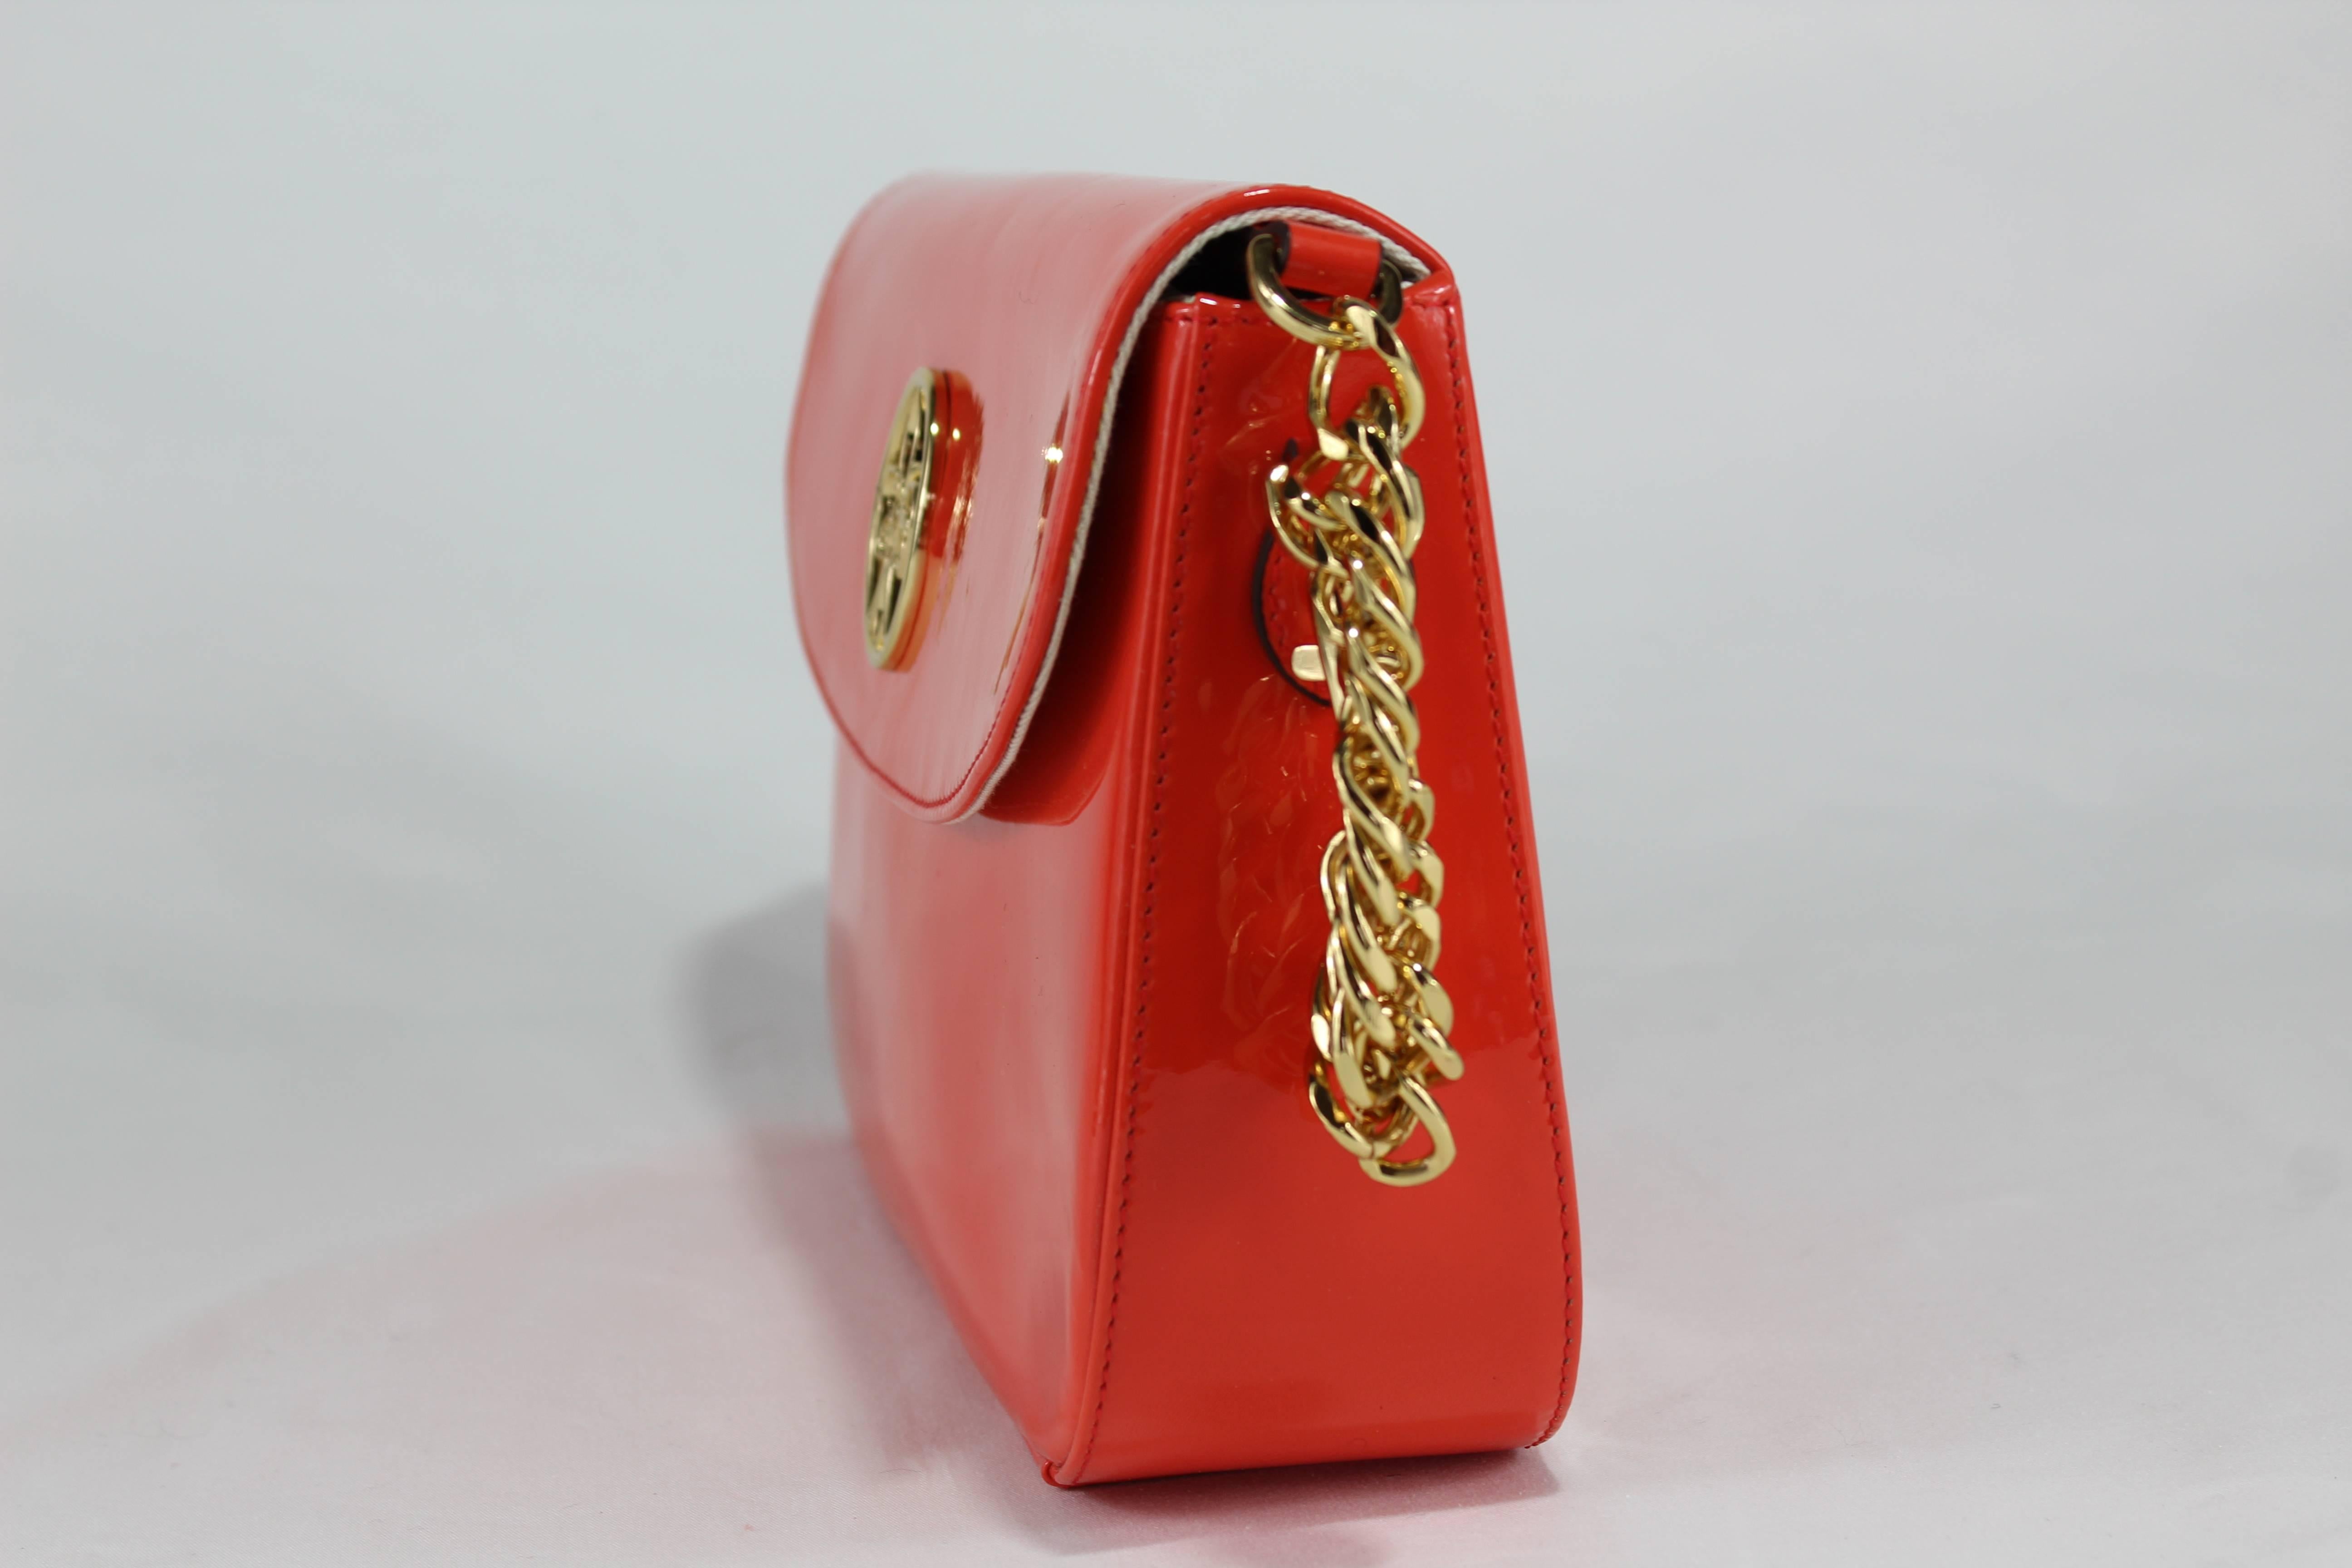 The handbag Postillon reminds on the earlier days of the postmen. Its classical but elegant form is the product of Italian leather craftmenship designed by Daniella di Royale and was produced in many colors with varnished leather but limited to only